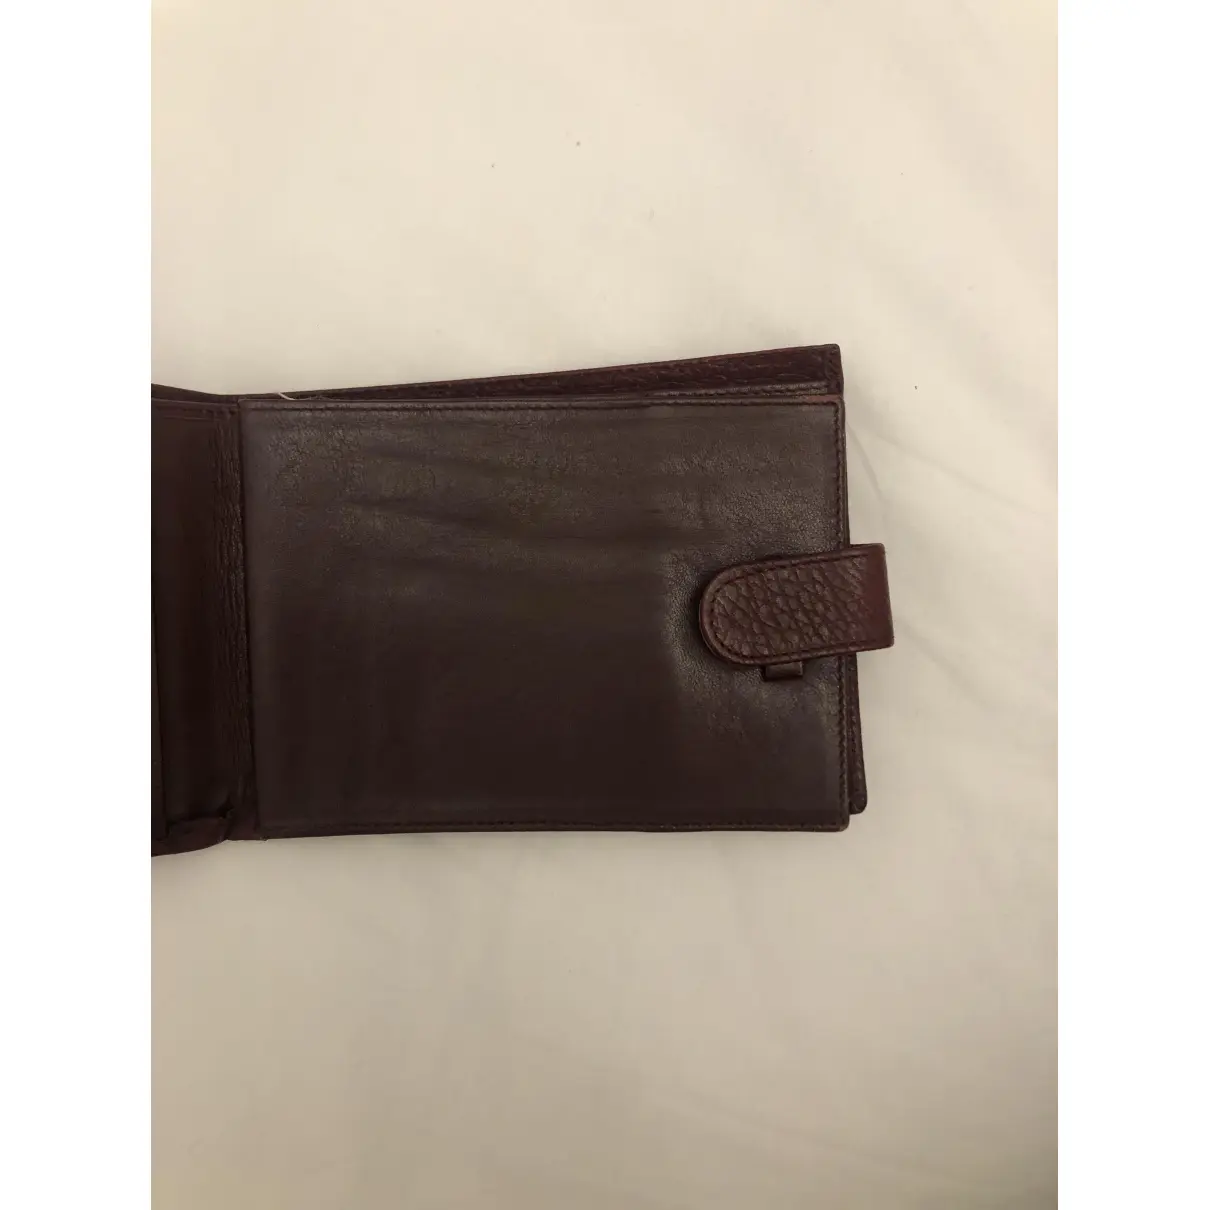 Buy Cartier Leather small bag online - Vintage